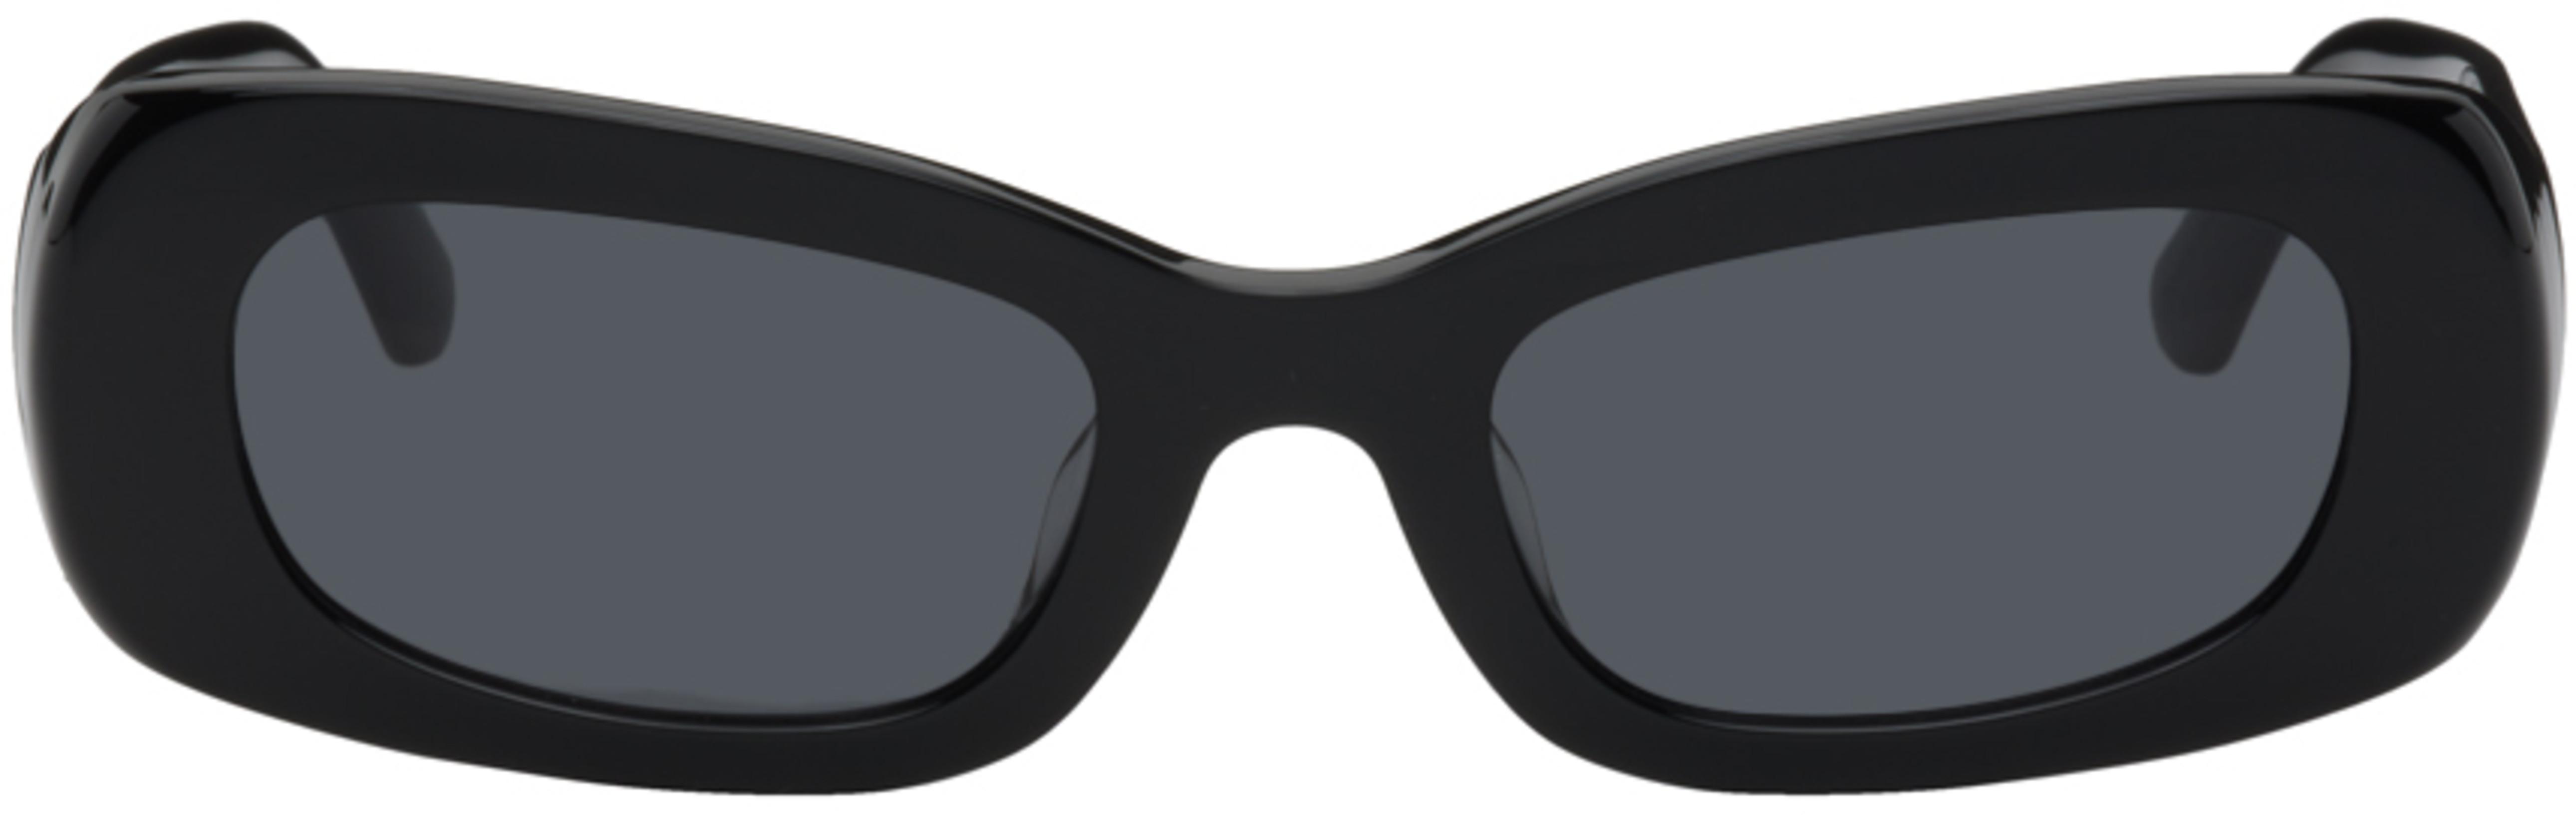 Black UFO Sunglasses by BONNIE CLYDE